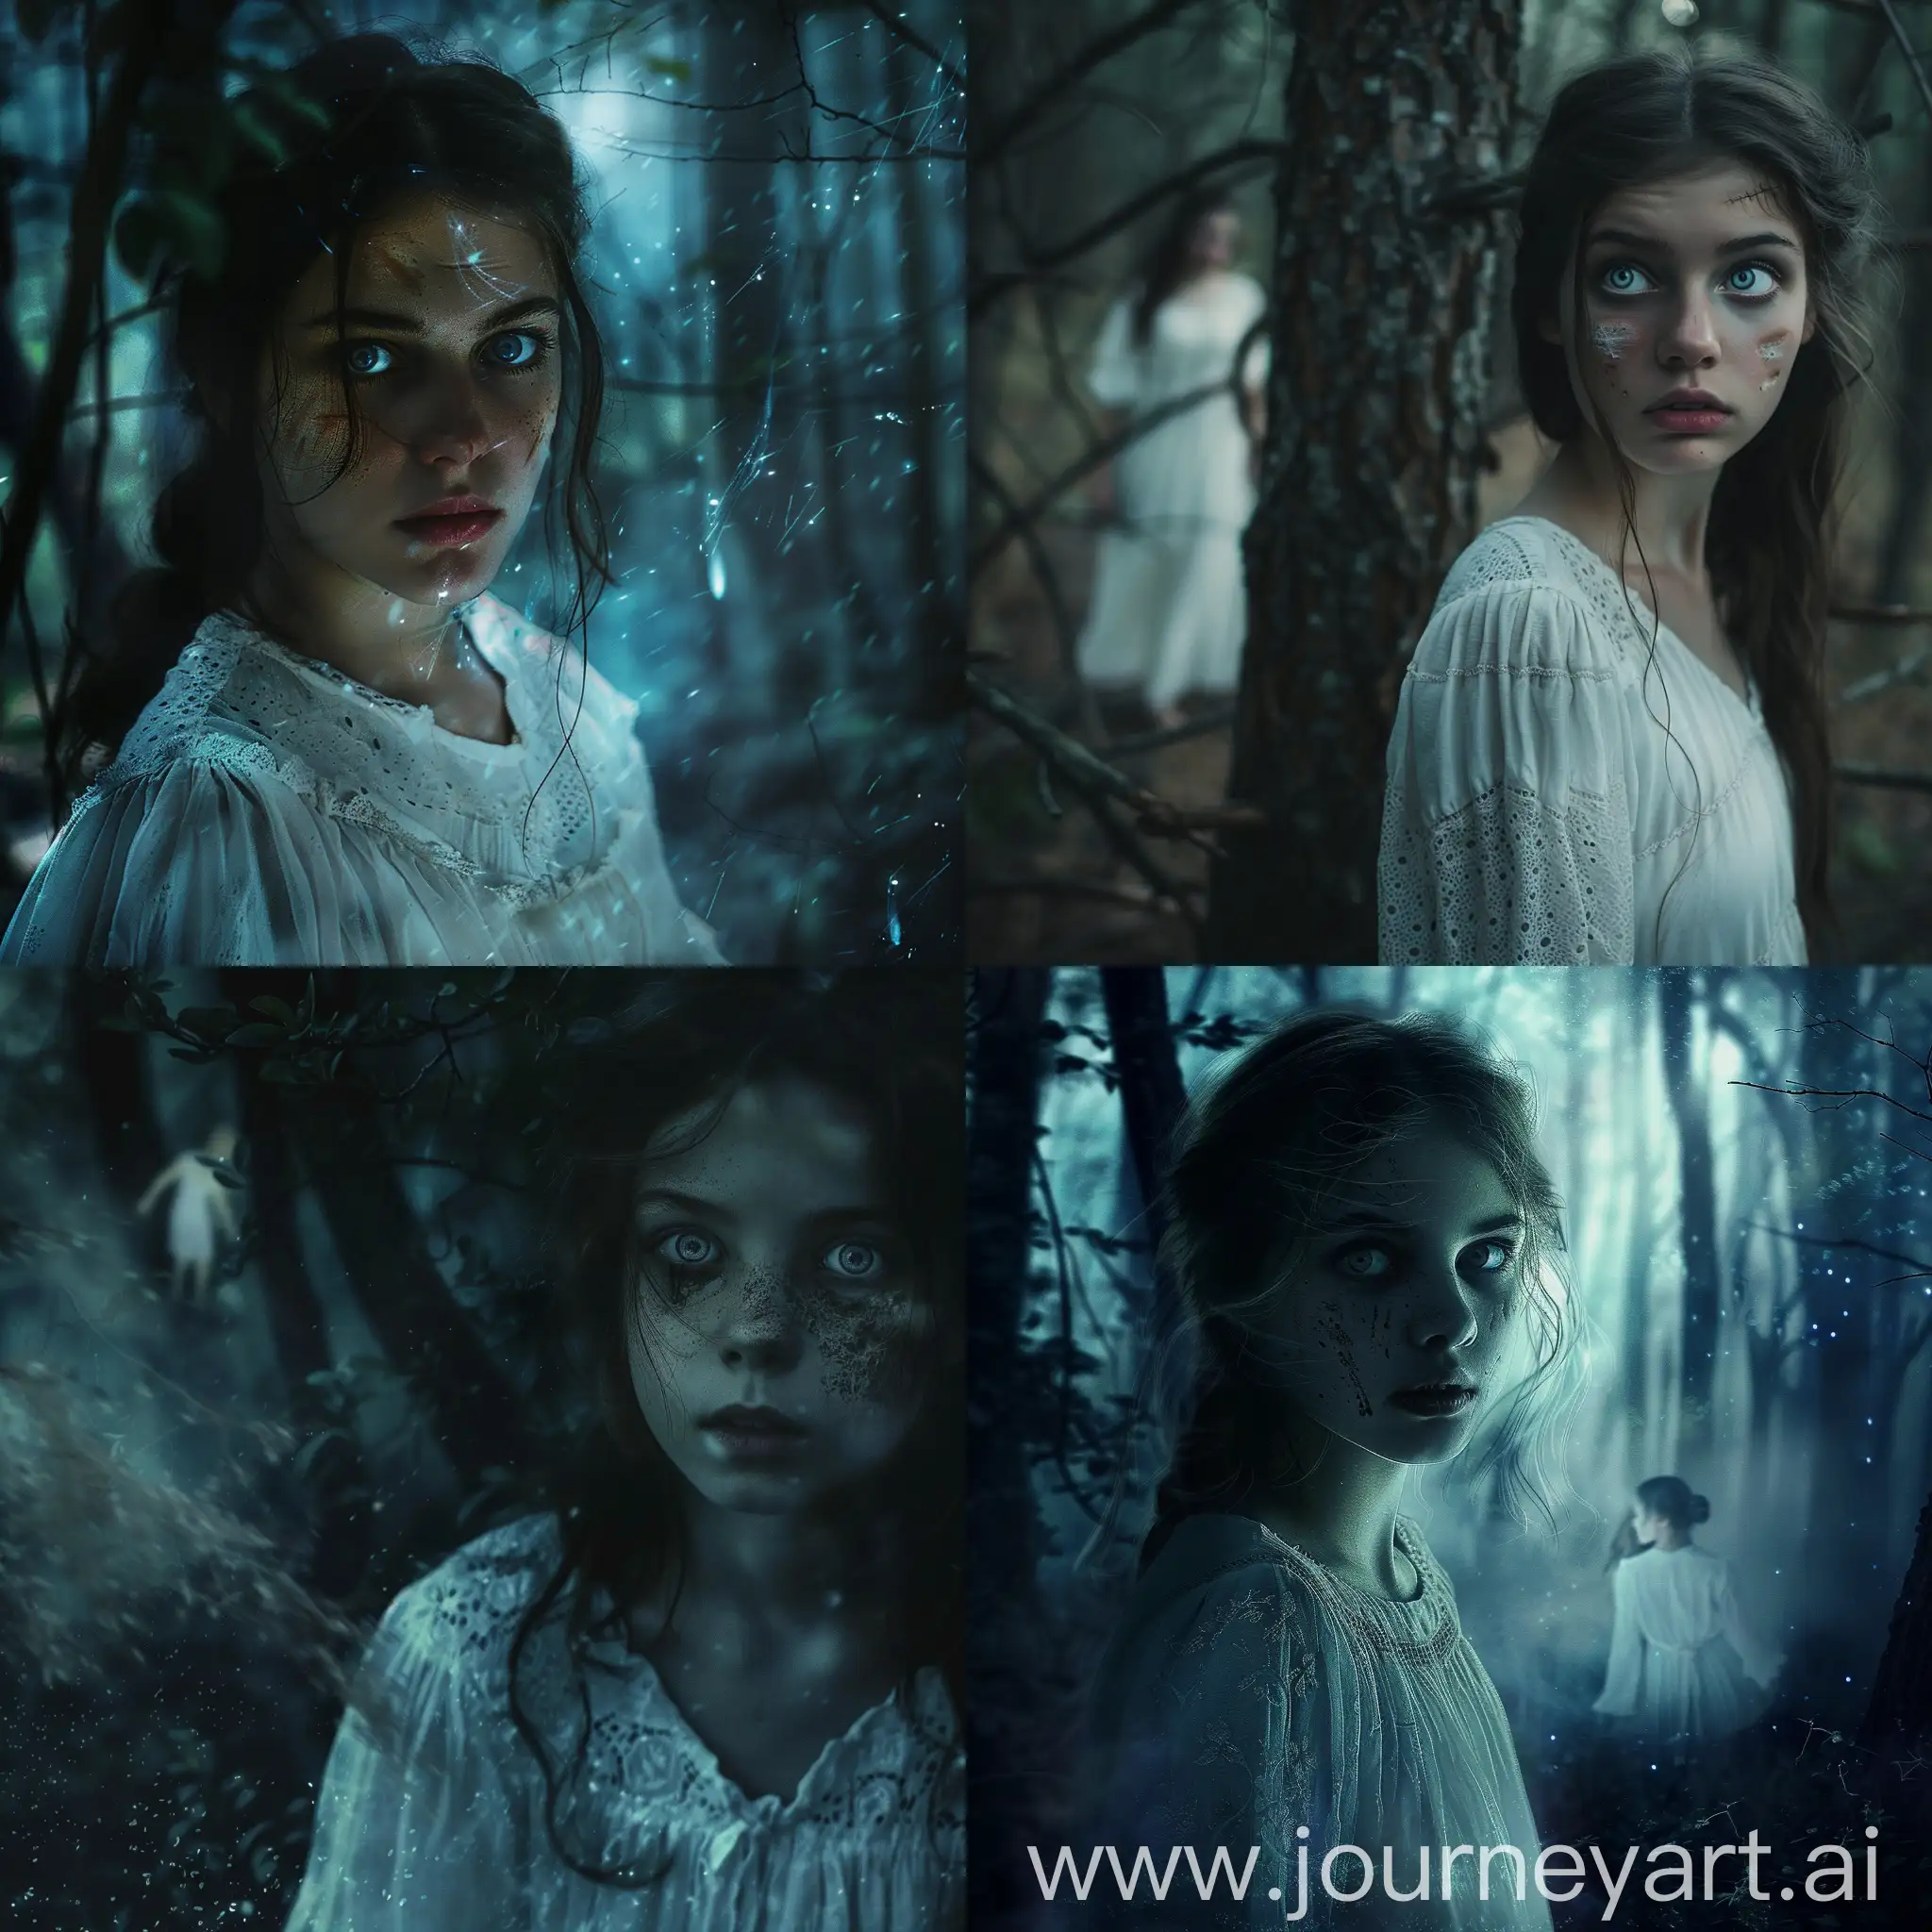 the girl is lost in the forest, the girl is wearing a white nightgown with long sleeves, a dark and mystical forest is around her, the girl is confused, there are abrasions on her face, the girl looks around, she has big blue eyes, someone's image in white flashes in the distance between the trees